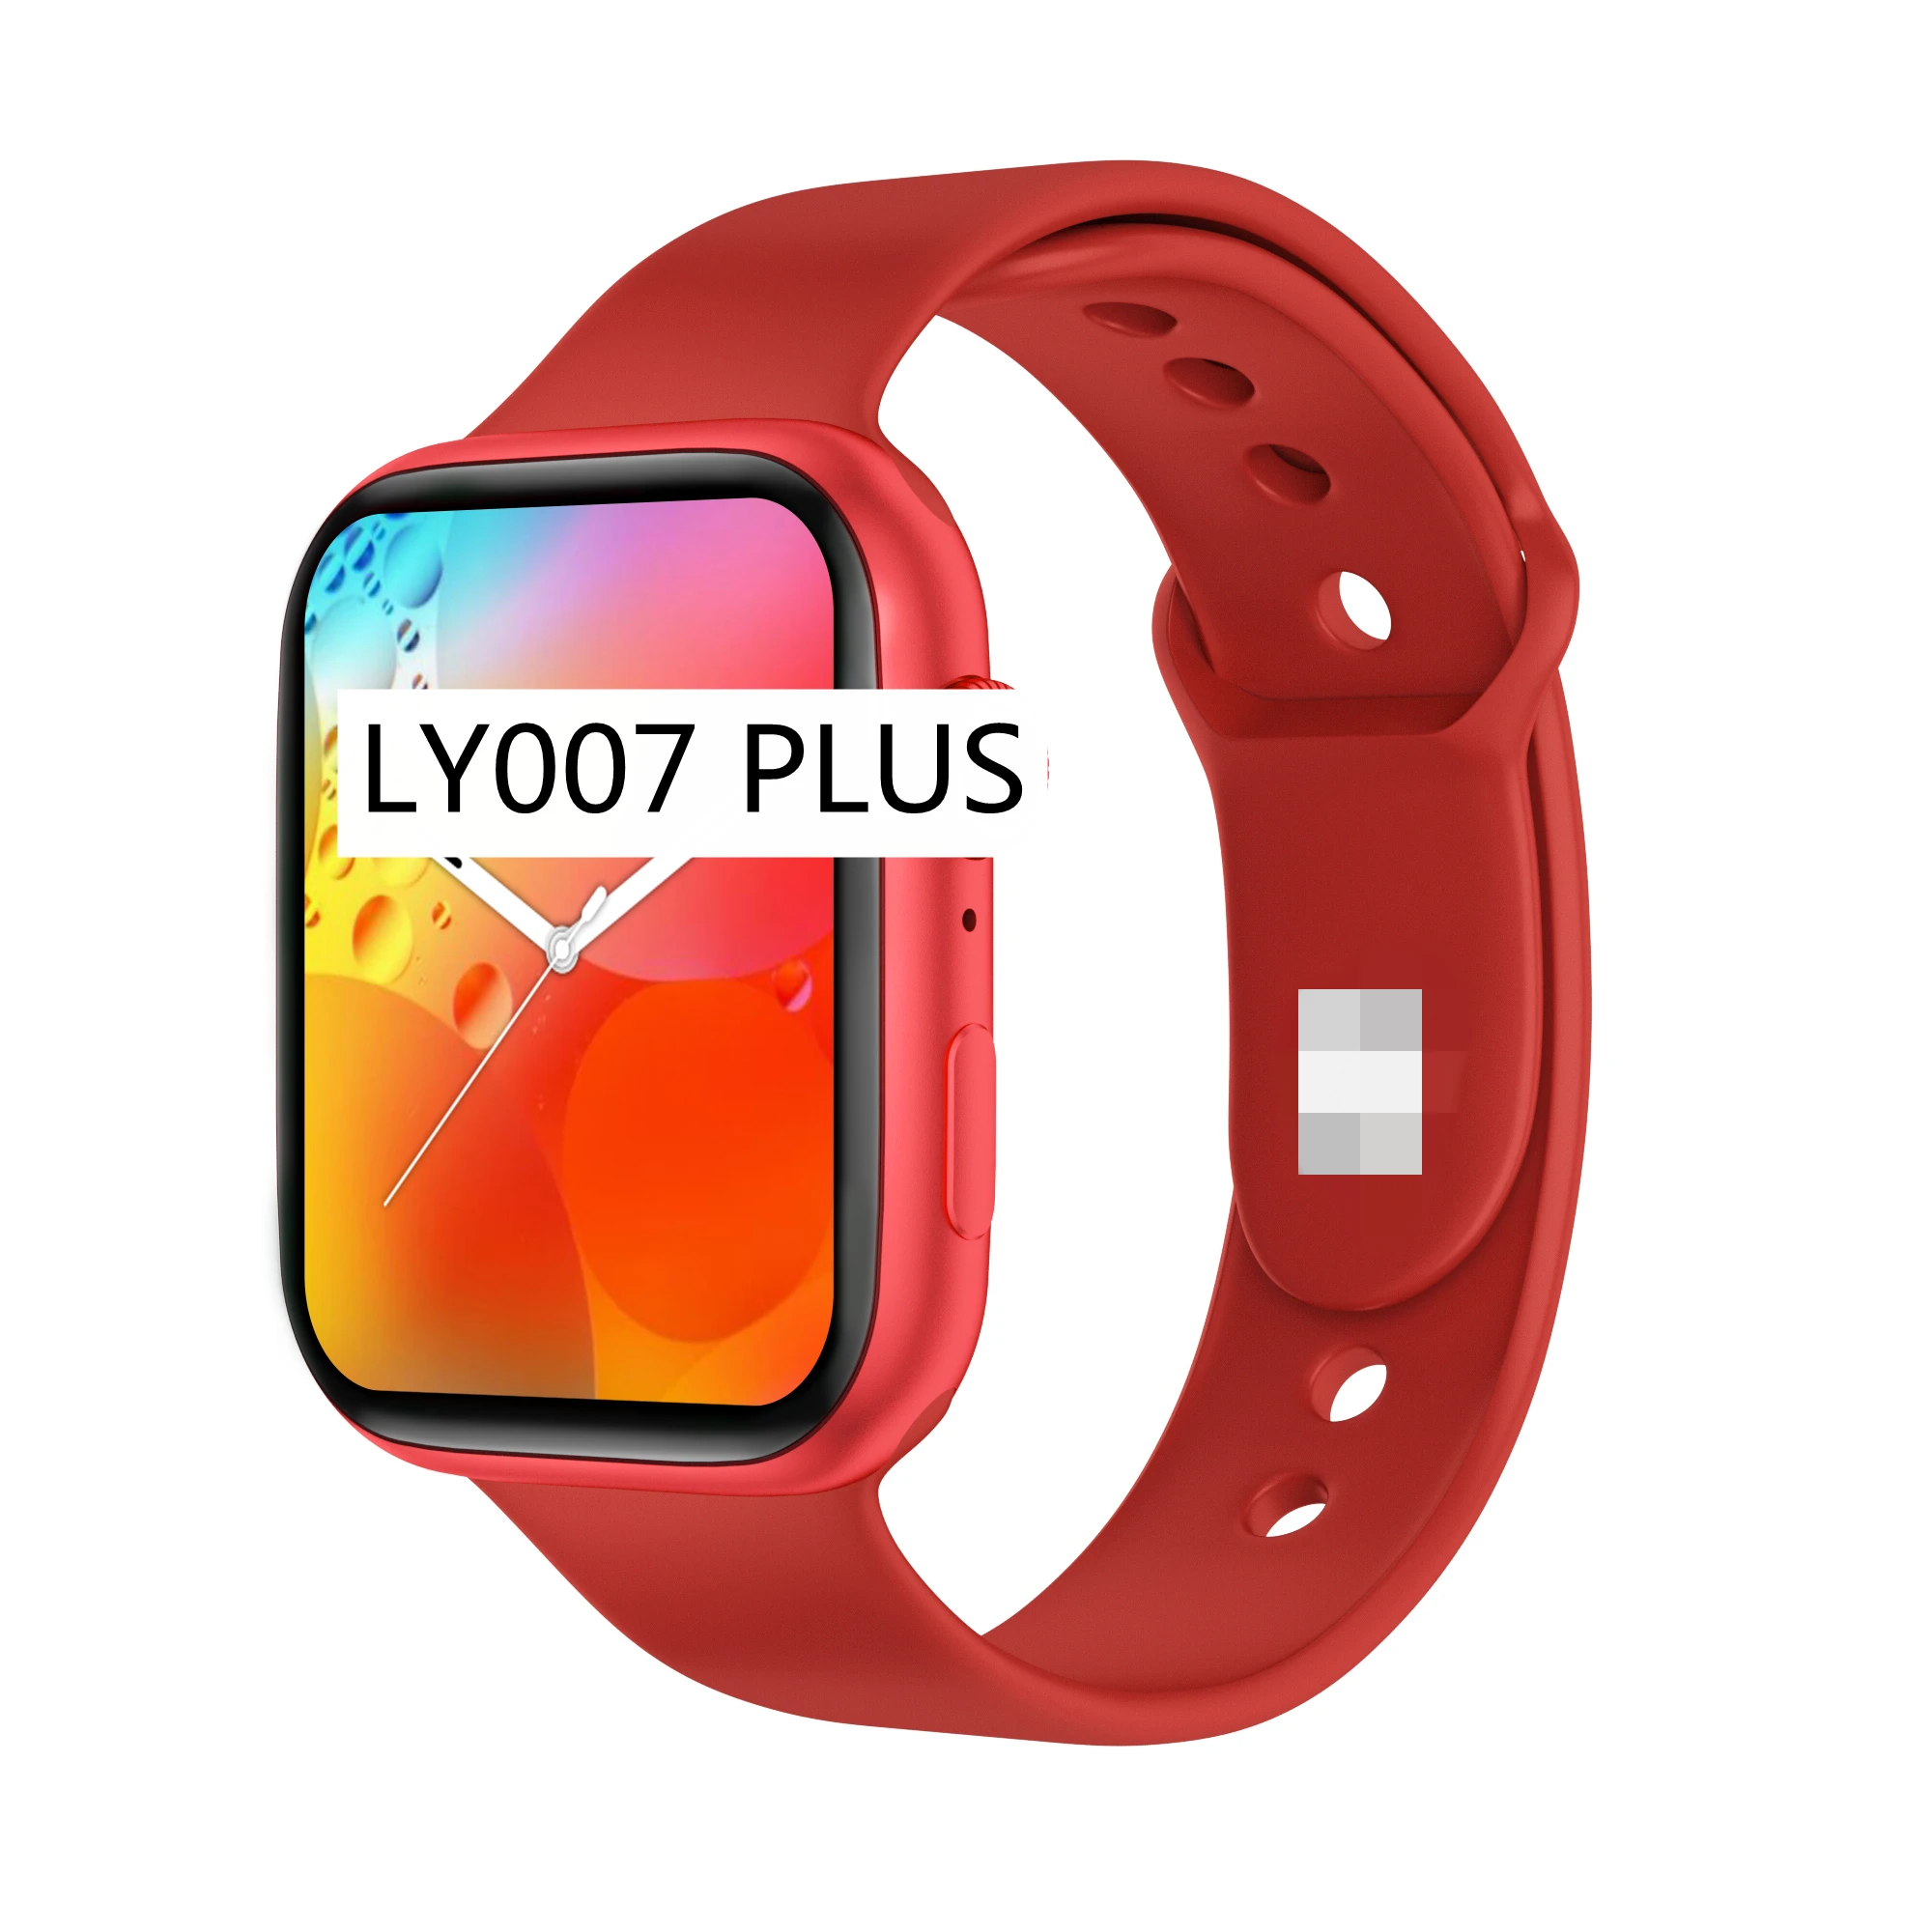 

LY007 PLUS Wearfit Pro Smart Watch Ip68 Power Consumption Heart Rate Bp Blood Oxygen Health Monitor Smartwatch Android And Ios